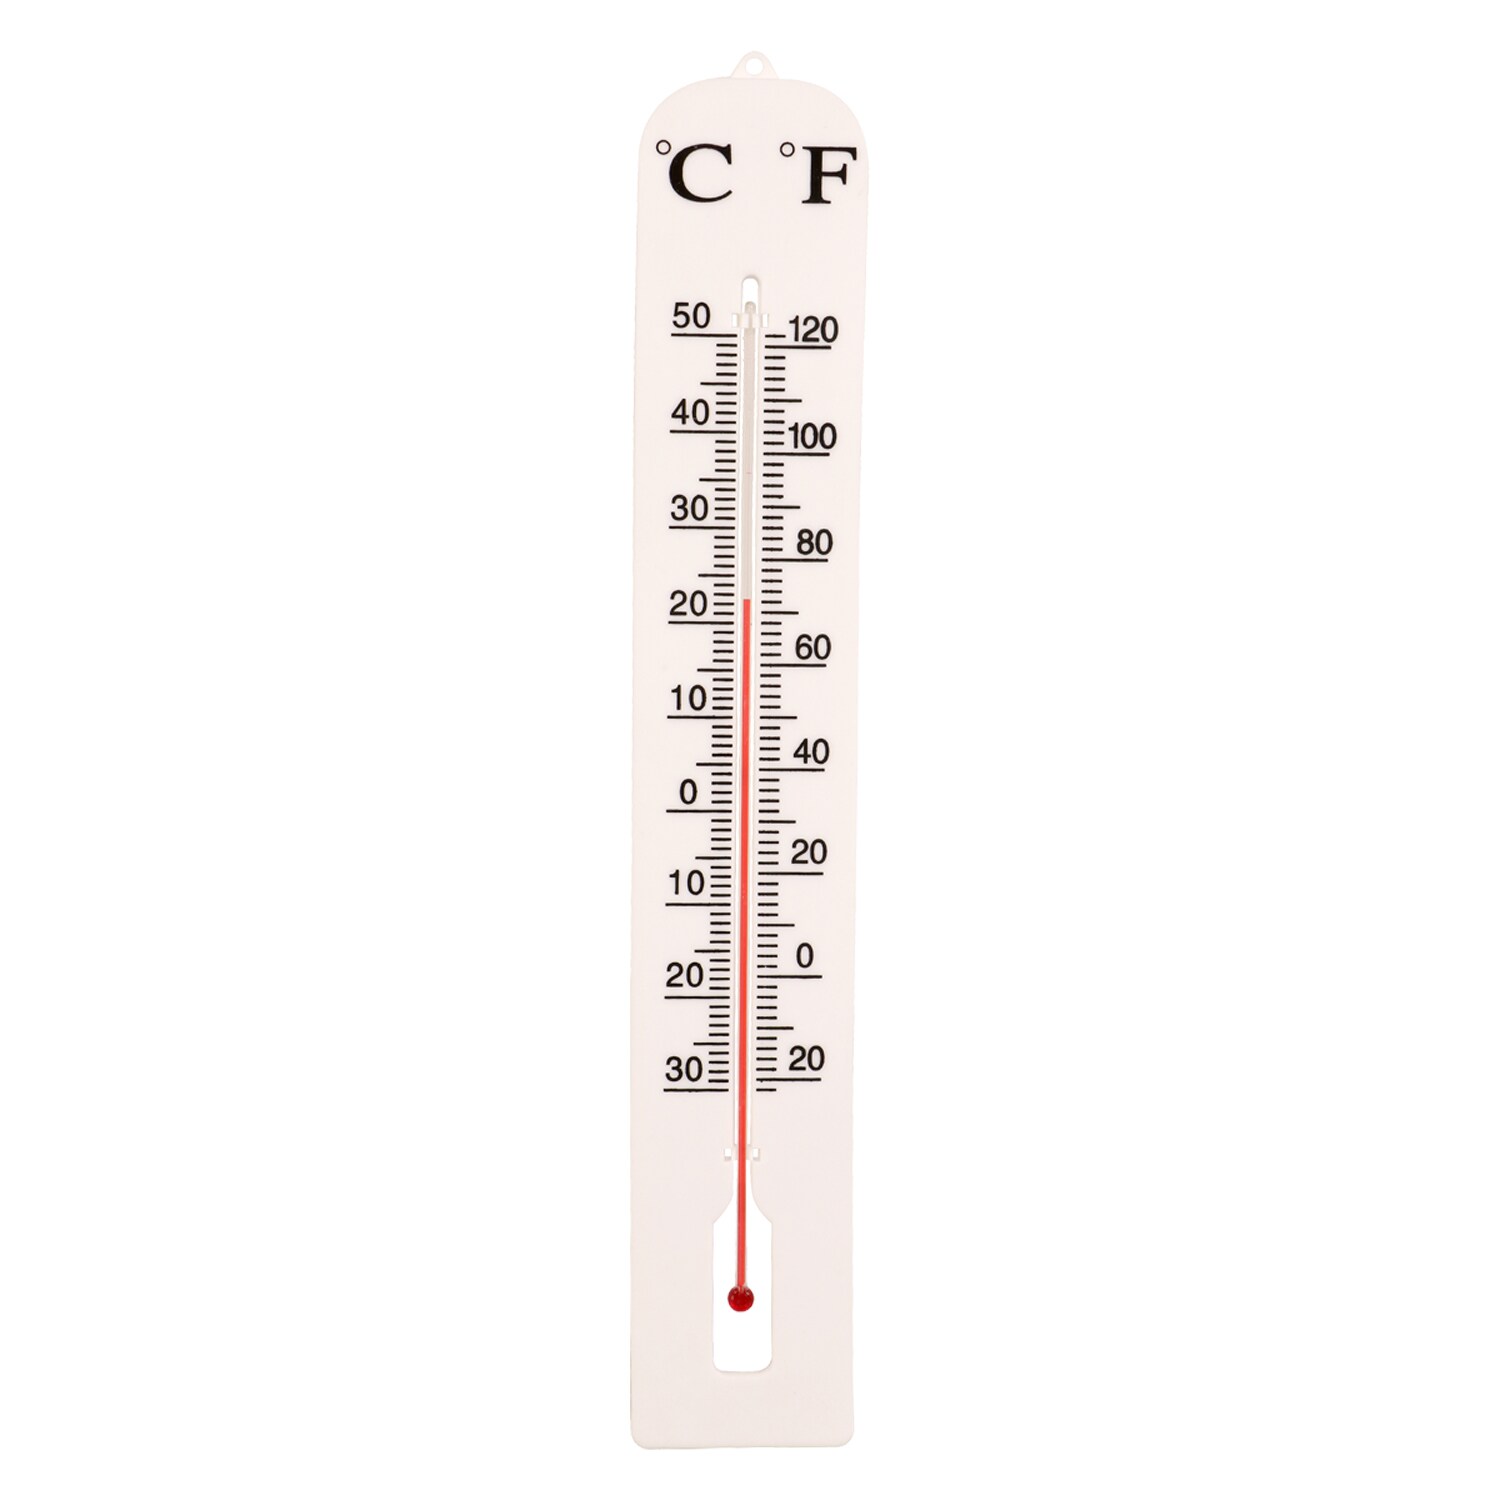 blomus 65242 Garden Thermometer Stainless Steel/acrylic